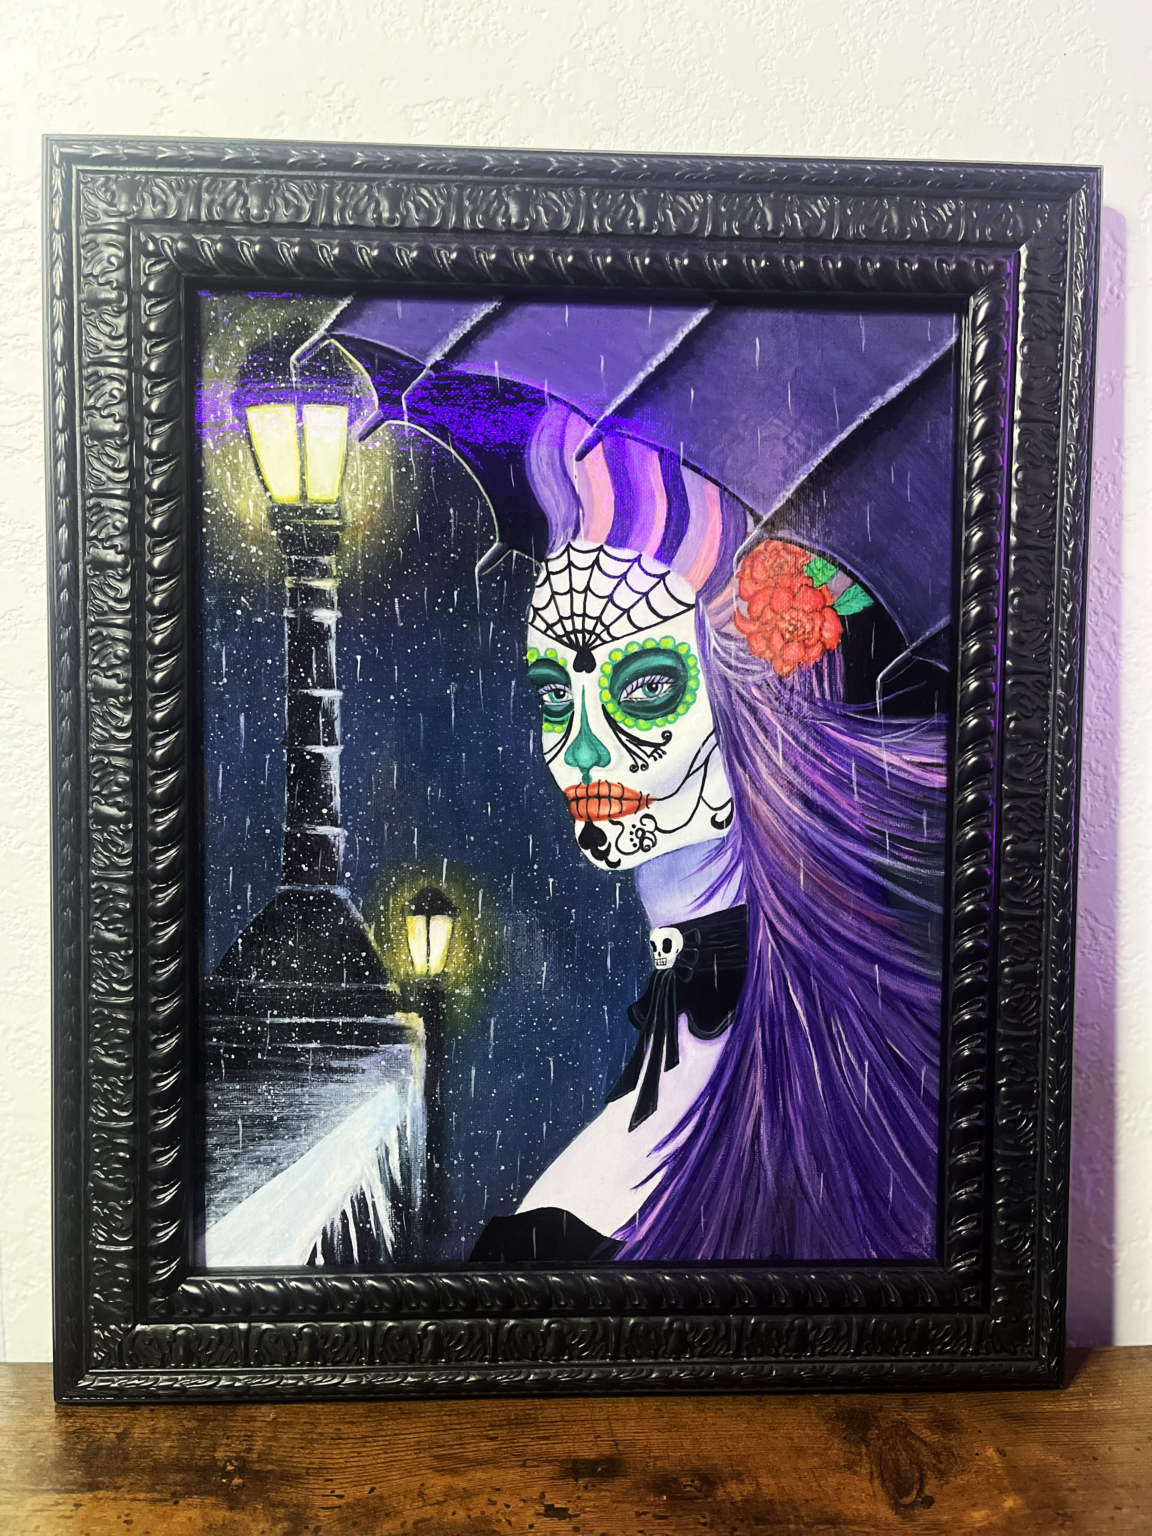 "Night of the Beauty" an original painting by The Dreaming Siren, depicting a woman with a Día de los Muertos face painting, vibrant purple hair, and a red flower, set against a nighttime street scene with rain and street lamps.